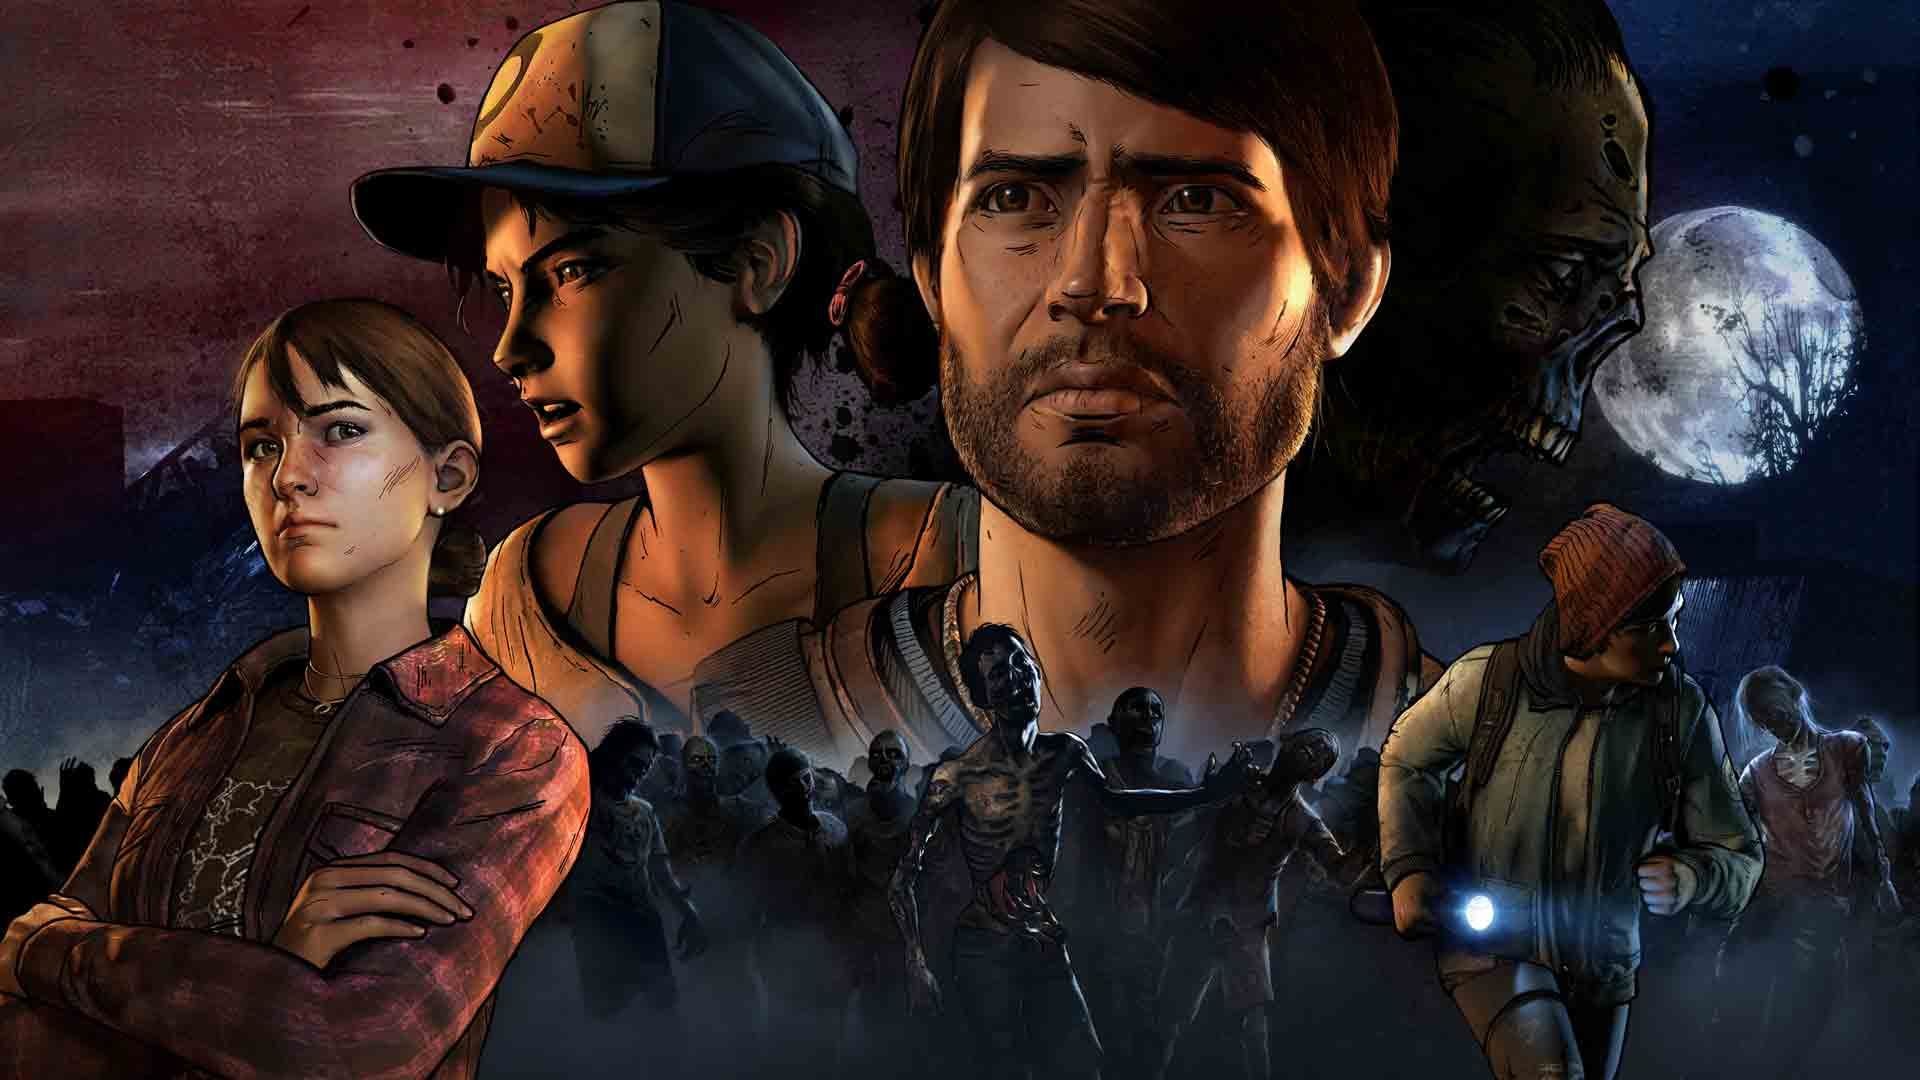 PAX East 2017 Telltale Games The Walking Dead A New Frontier Episode 3 Release Date Announced – The Walking Dead A Telltale Game Series Season Three